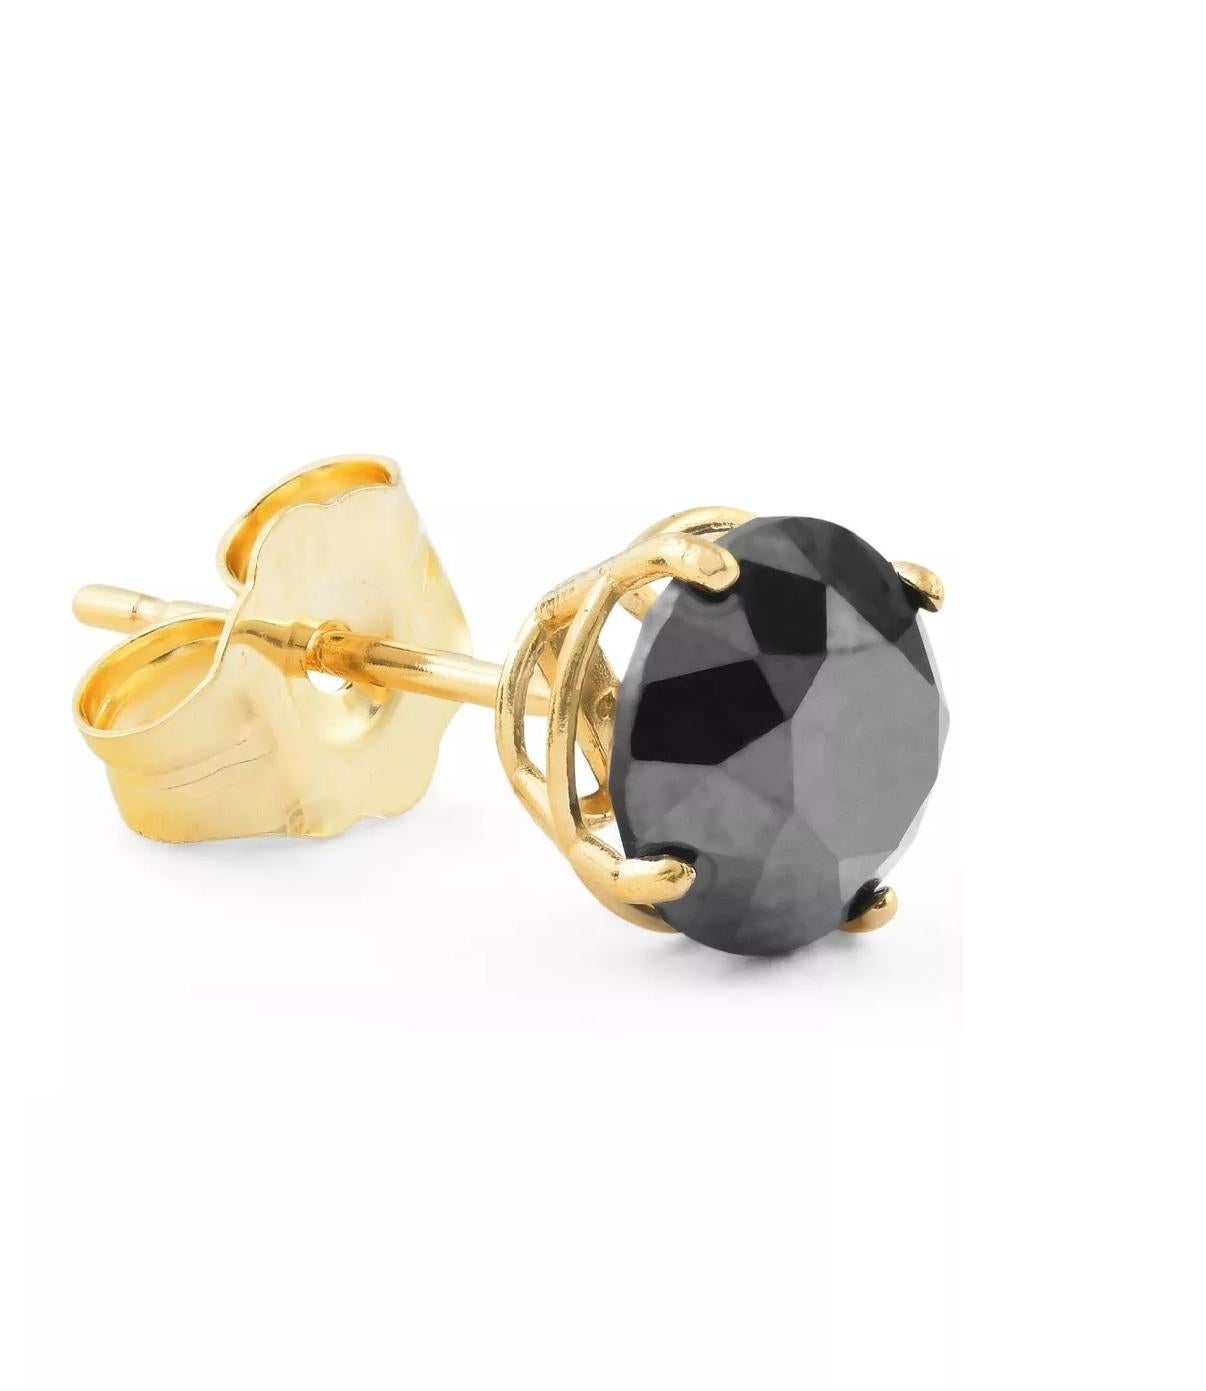 Round Cut 0.75 Carat Total Round Black Diamond Solitaire Stud Earrings in 14 K Yellow Gold